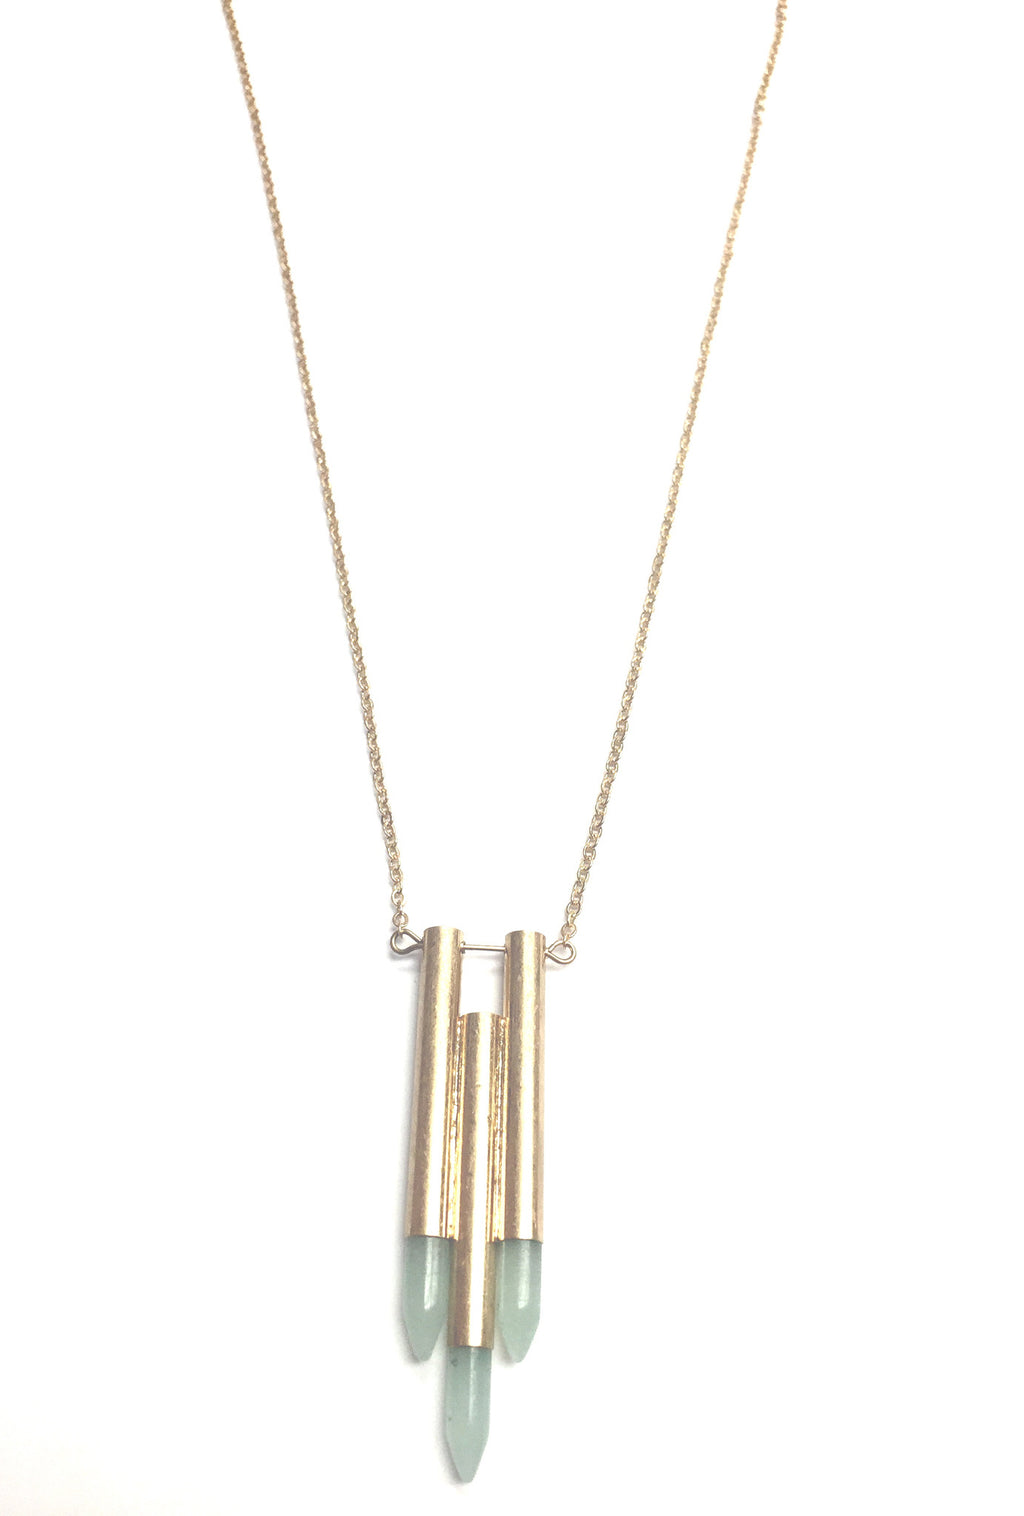 Brushed gold long medallion necklace with a spike accent at the bottom - LB Mint